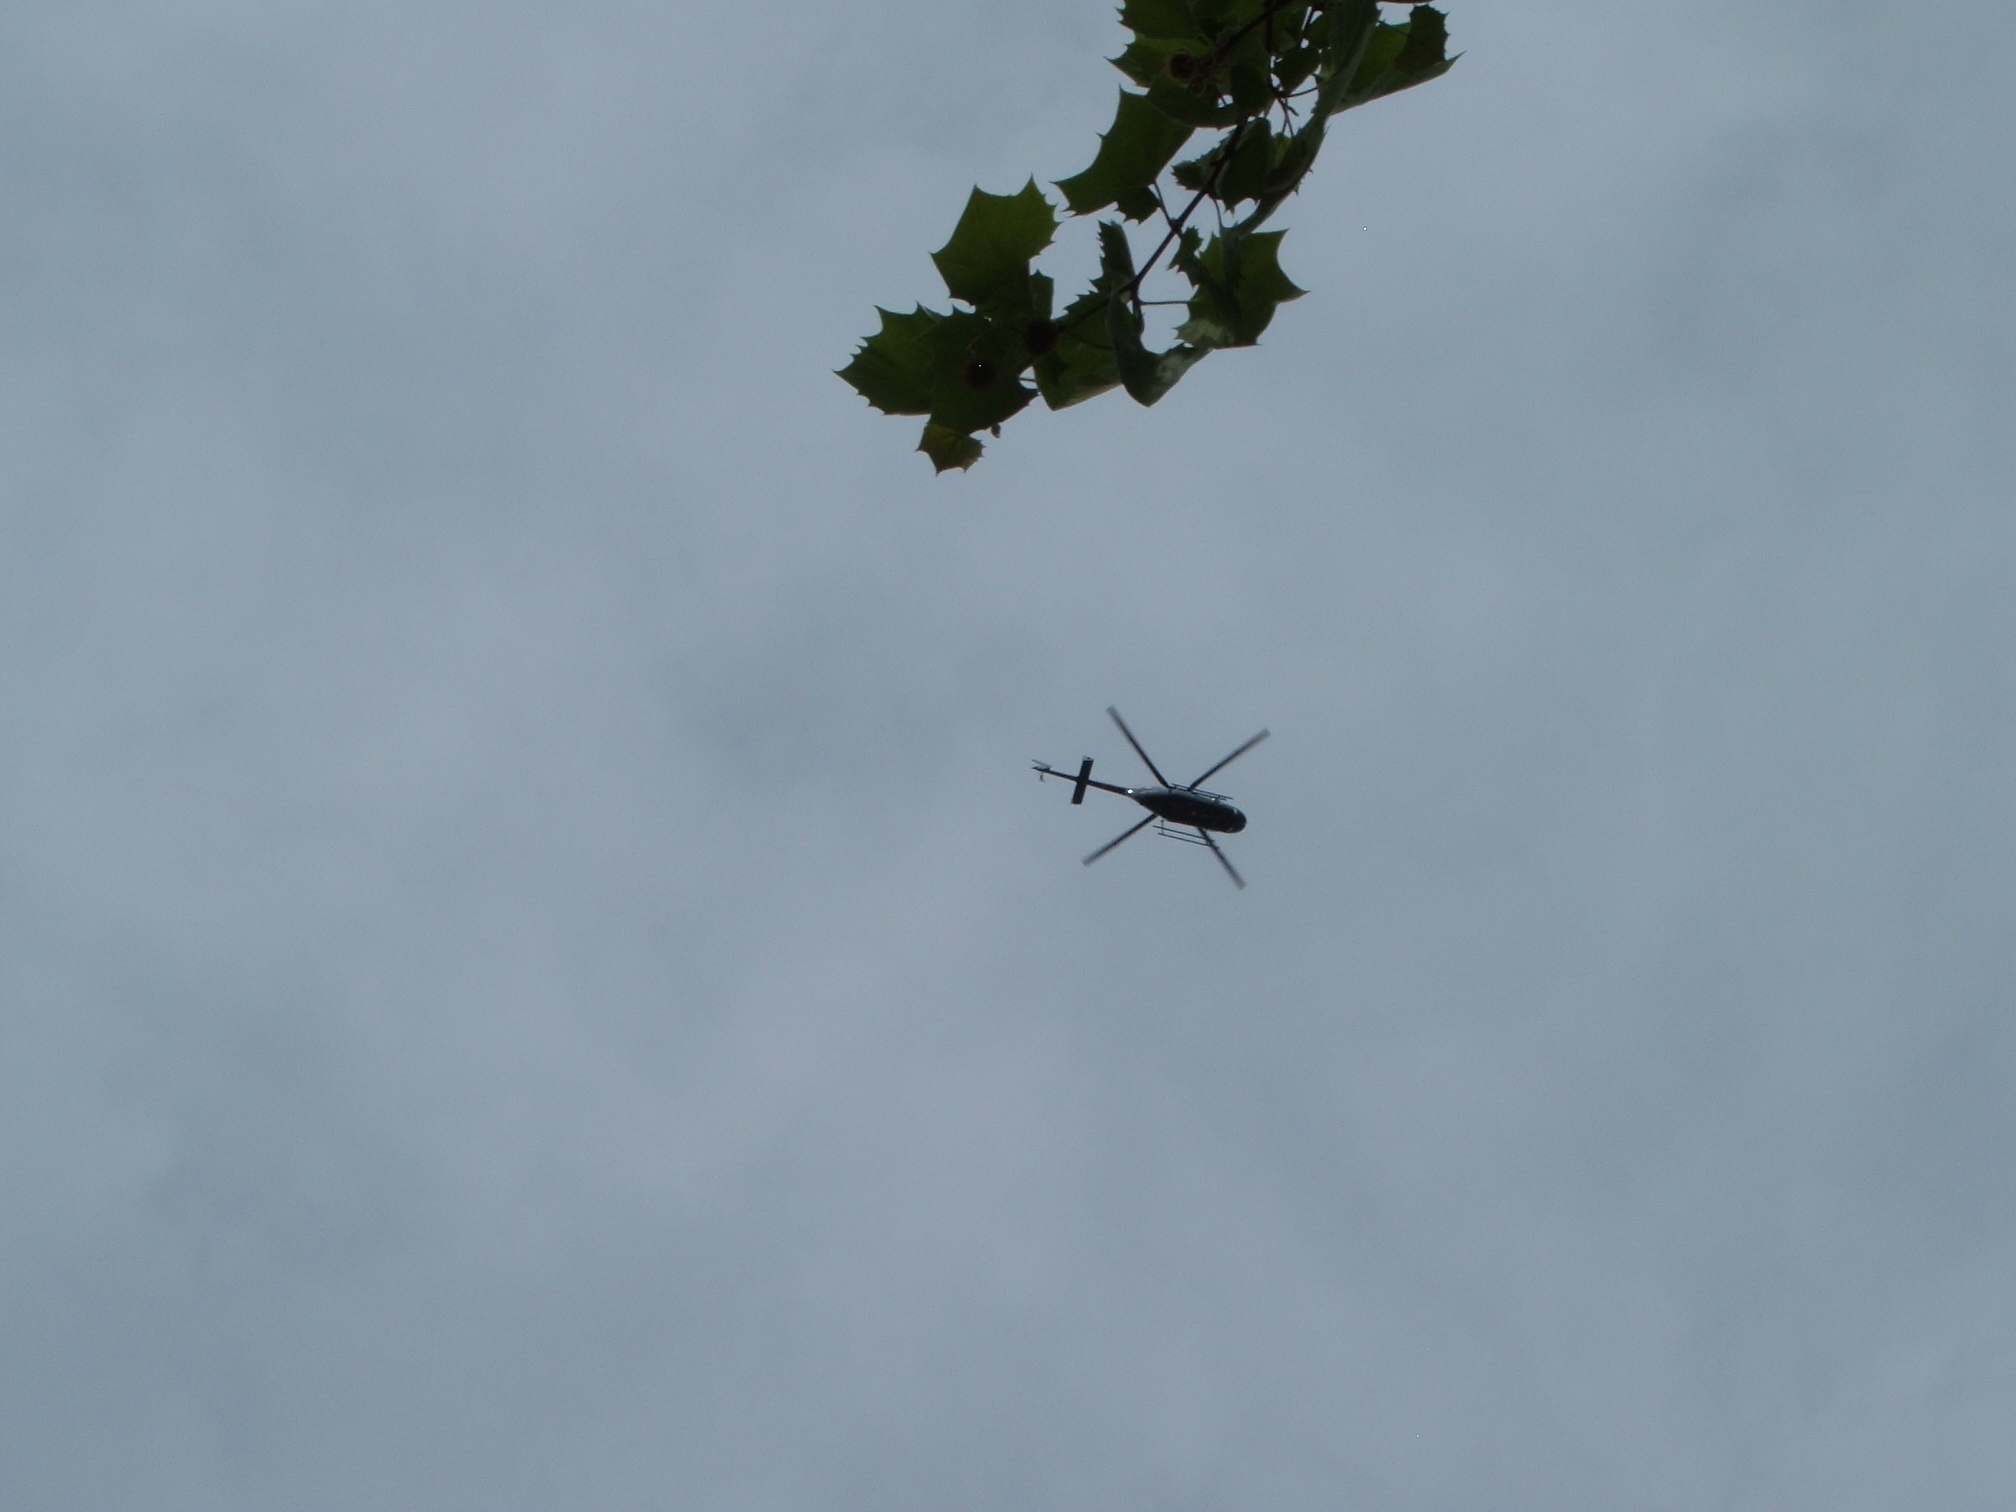 A Indiana State Police helicoptor seen from below (under a tree branch) against a cloudy sky.